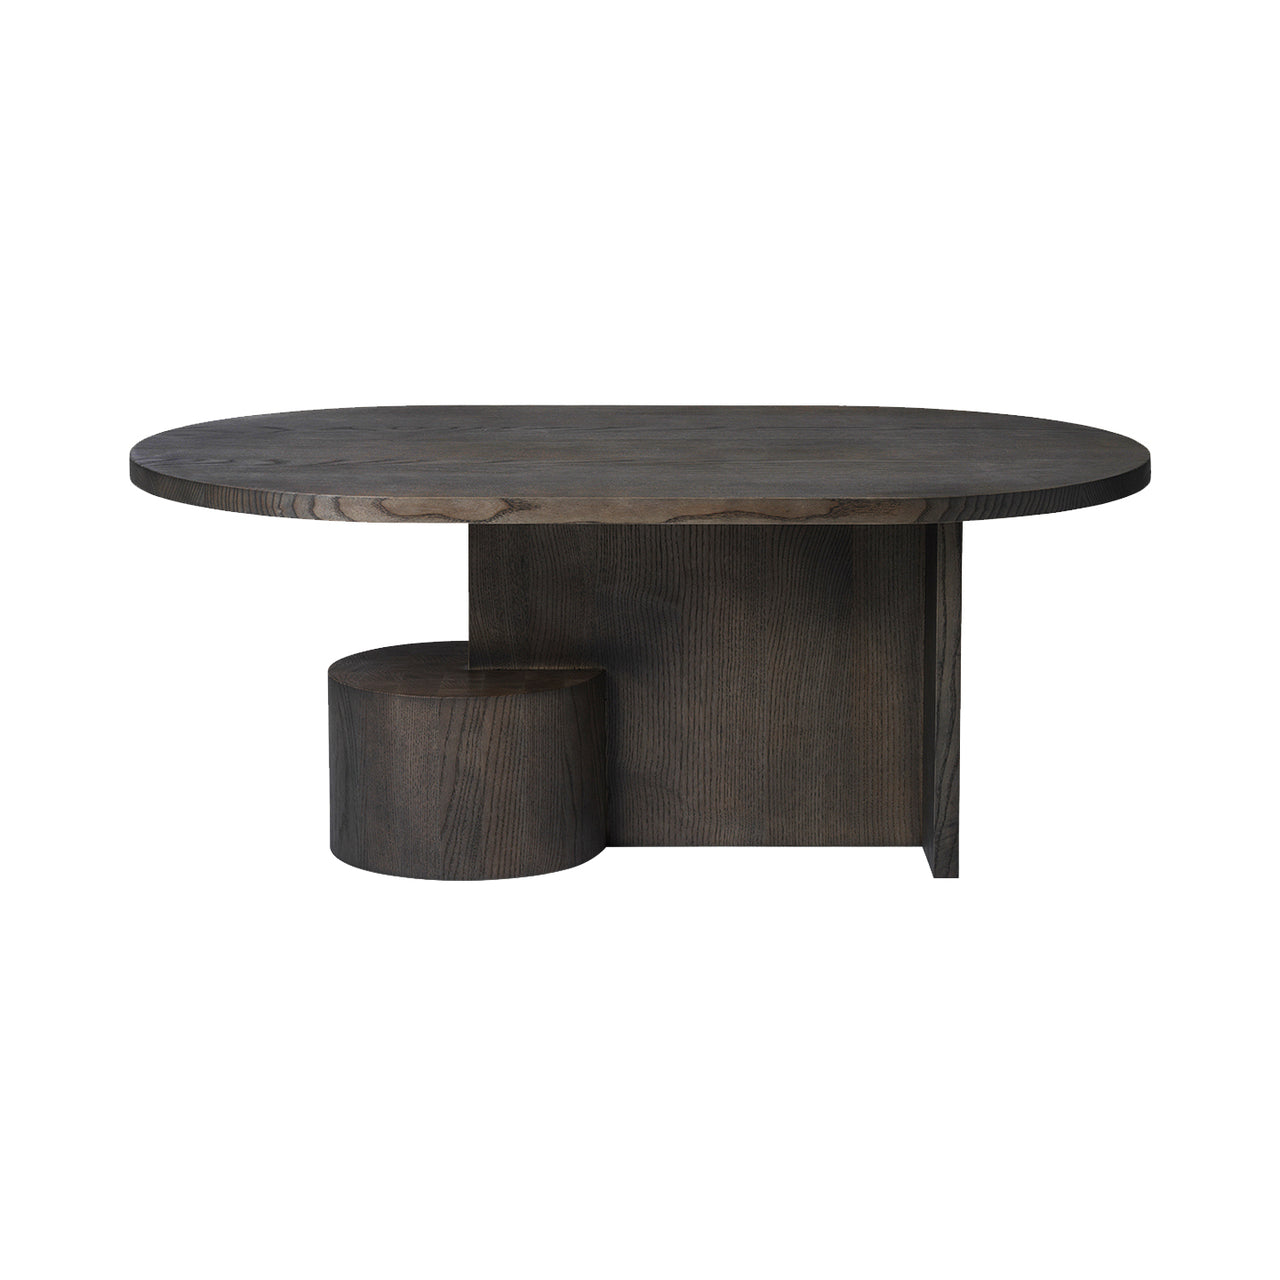 Insert Coffee Table: Black Stained Ash